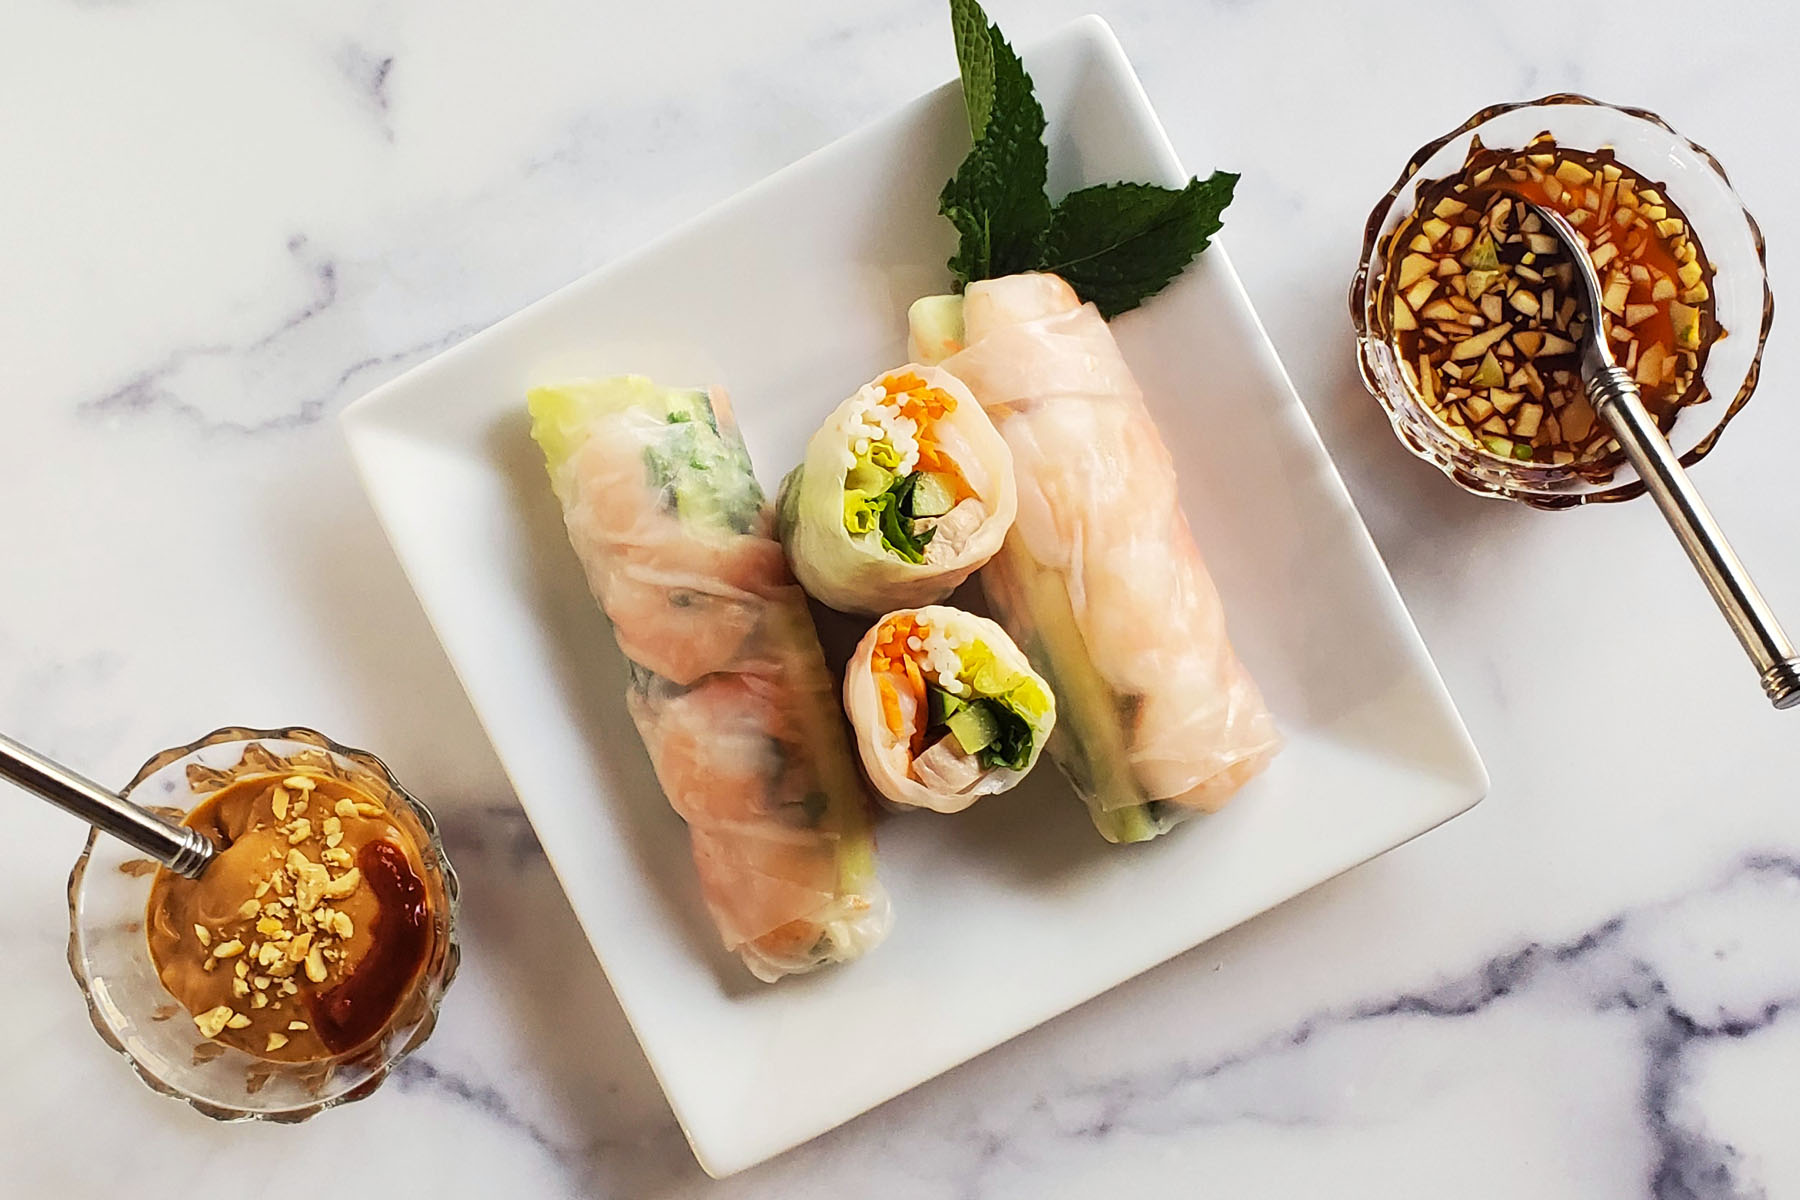 There are three Vietnamese Spring Rolls on a square, white plate. The roll in the middle is cut in half so we can see the shrimp, vegetables, pork and noodle inside. The plate is garnished with a sprig of mint leaf. On the diagonal sides, we see a peanut dipping sauce, sprinkled with crushed peanuts and sriracha on the lower left and a lighter brown colored sauce with floating pieces of mince garlic on the upper right. This is all on top of a white marble countertop.